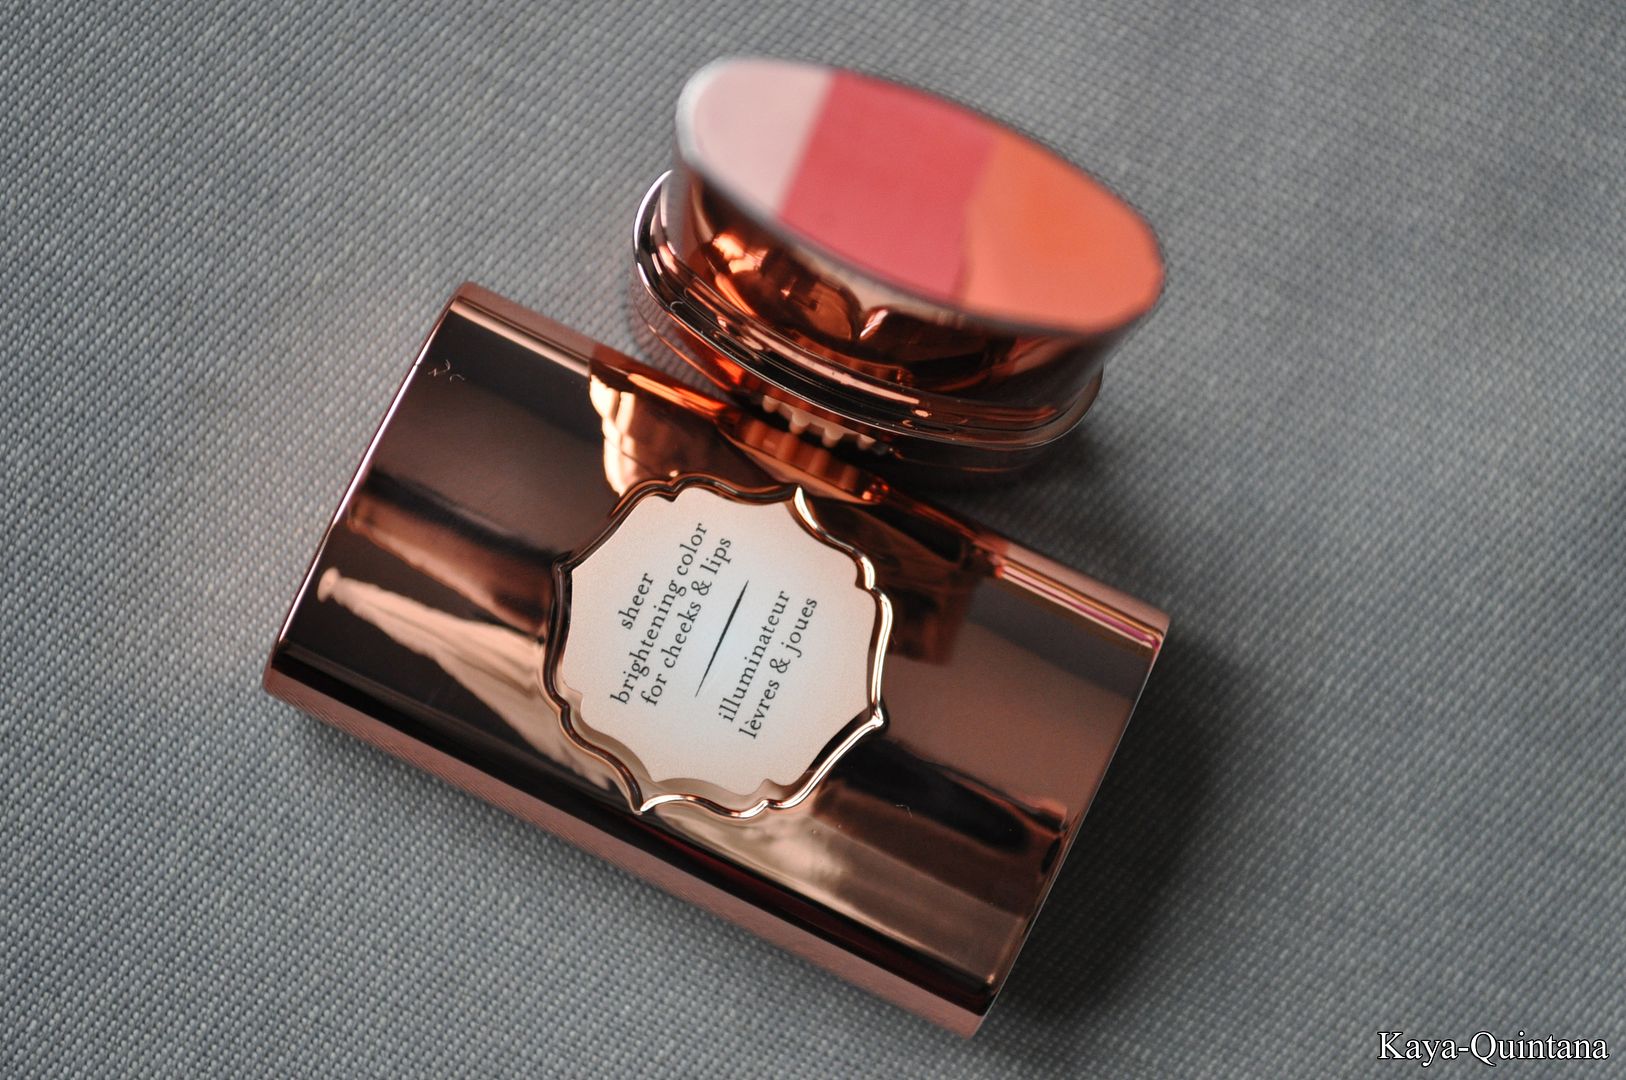 benefit fine-one-one sheer brightening color for cheeks and lips